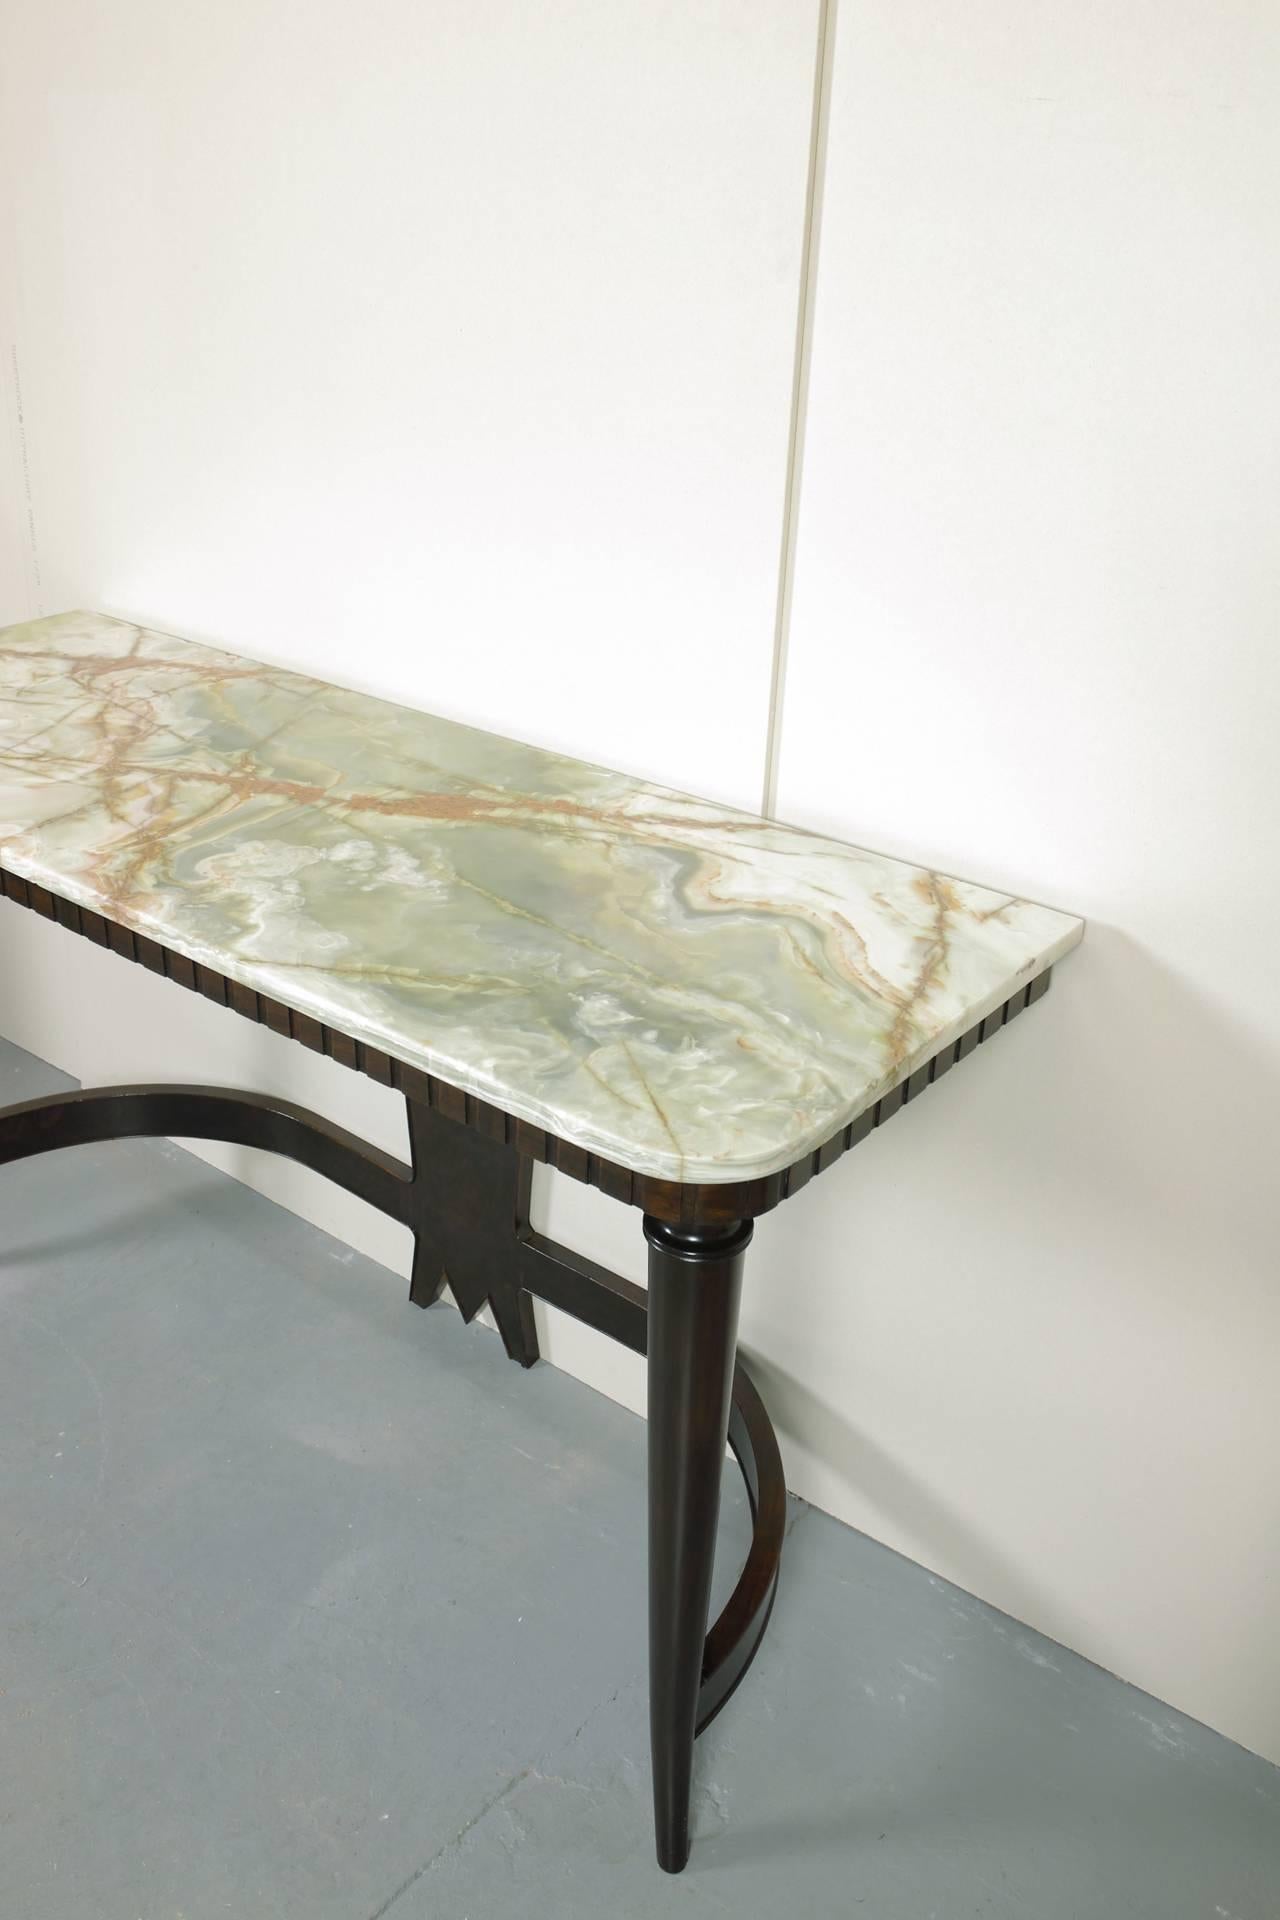 Walnut and Onyx Console Table by Luigi Scremin In Excellent Condition For Sale In Saarbruecken, DE